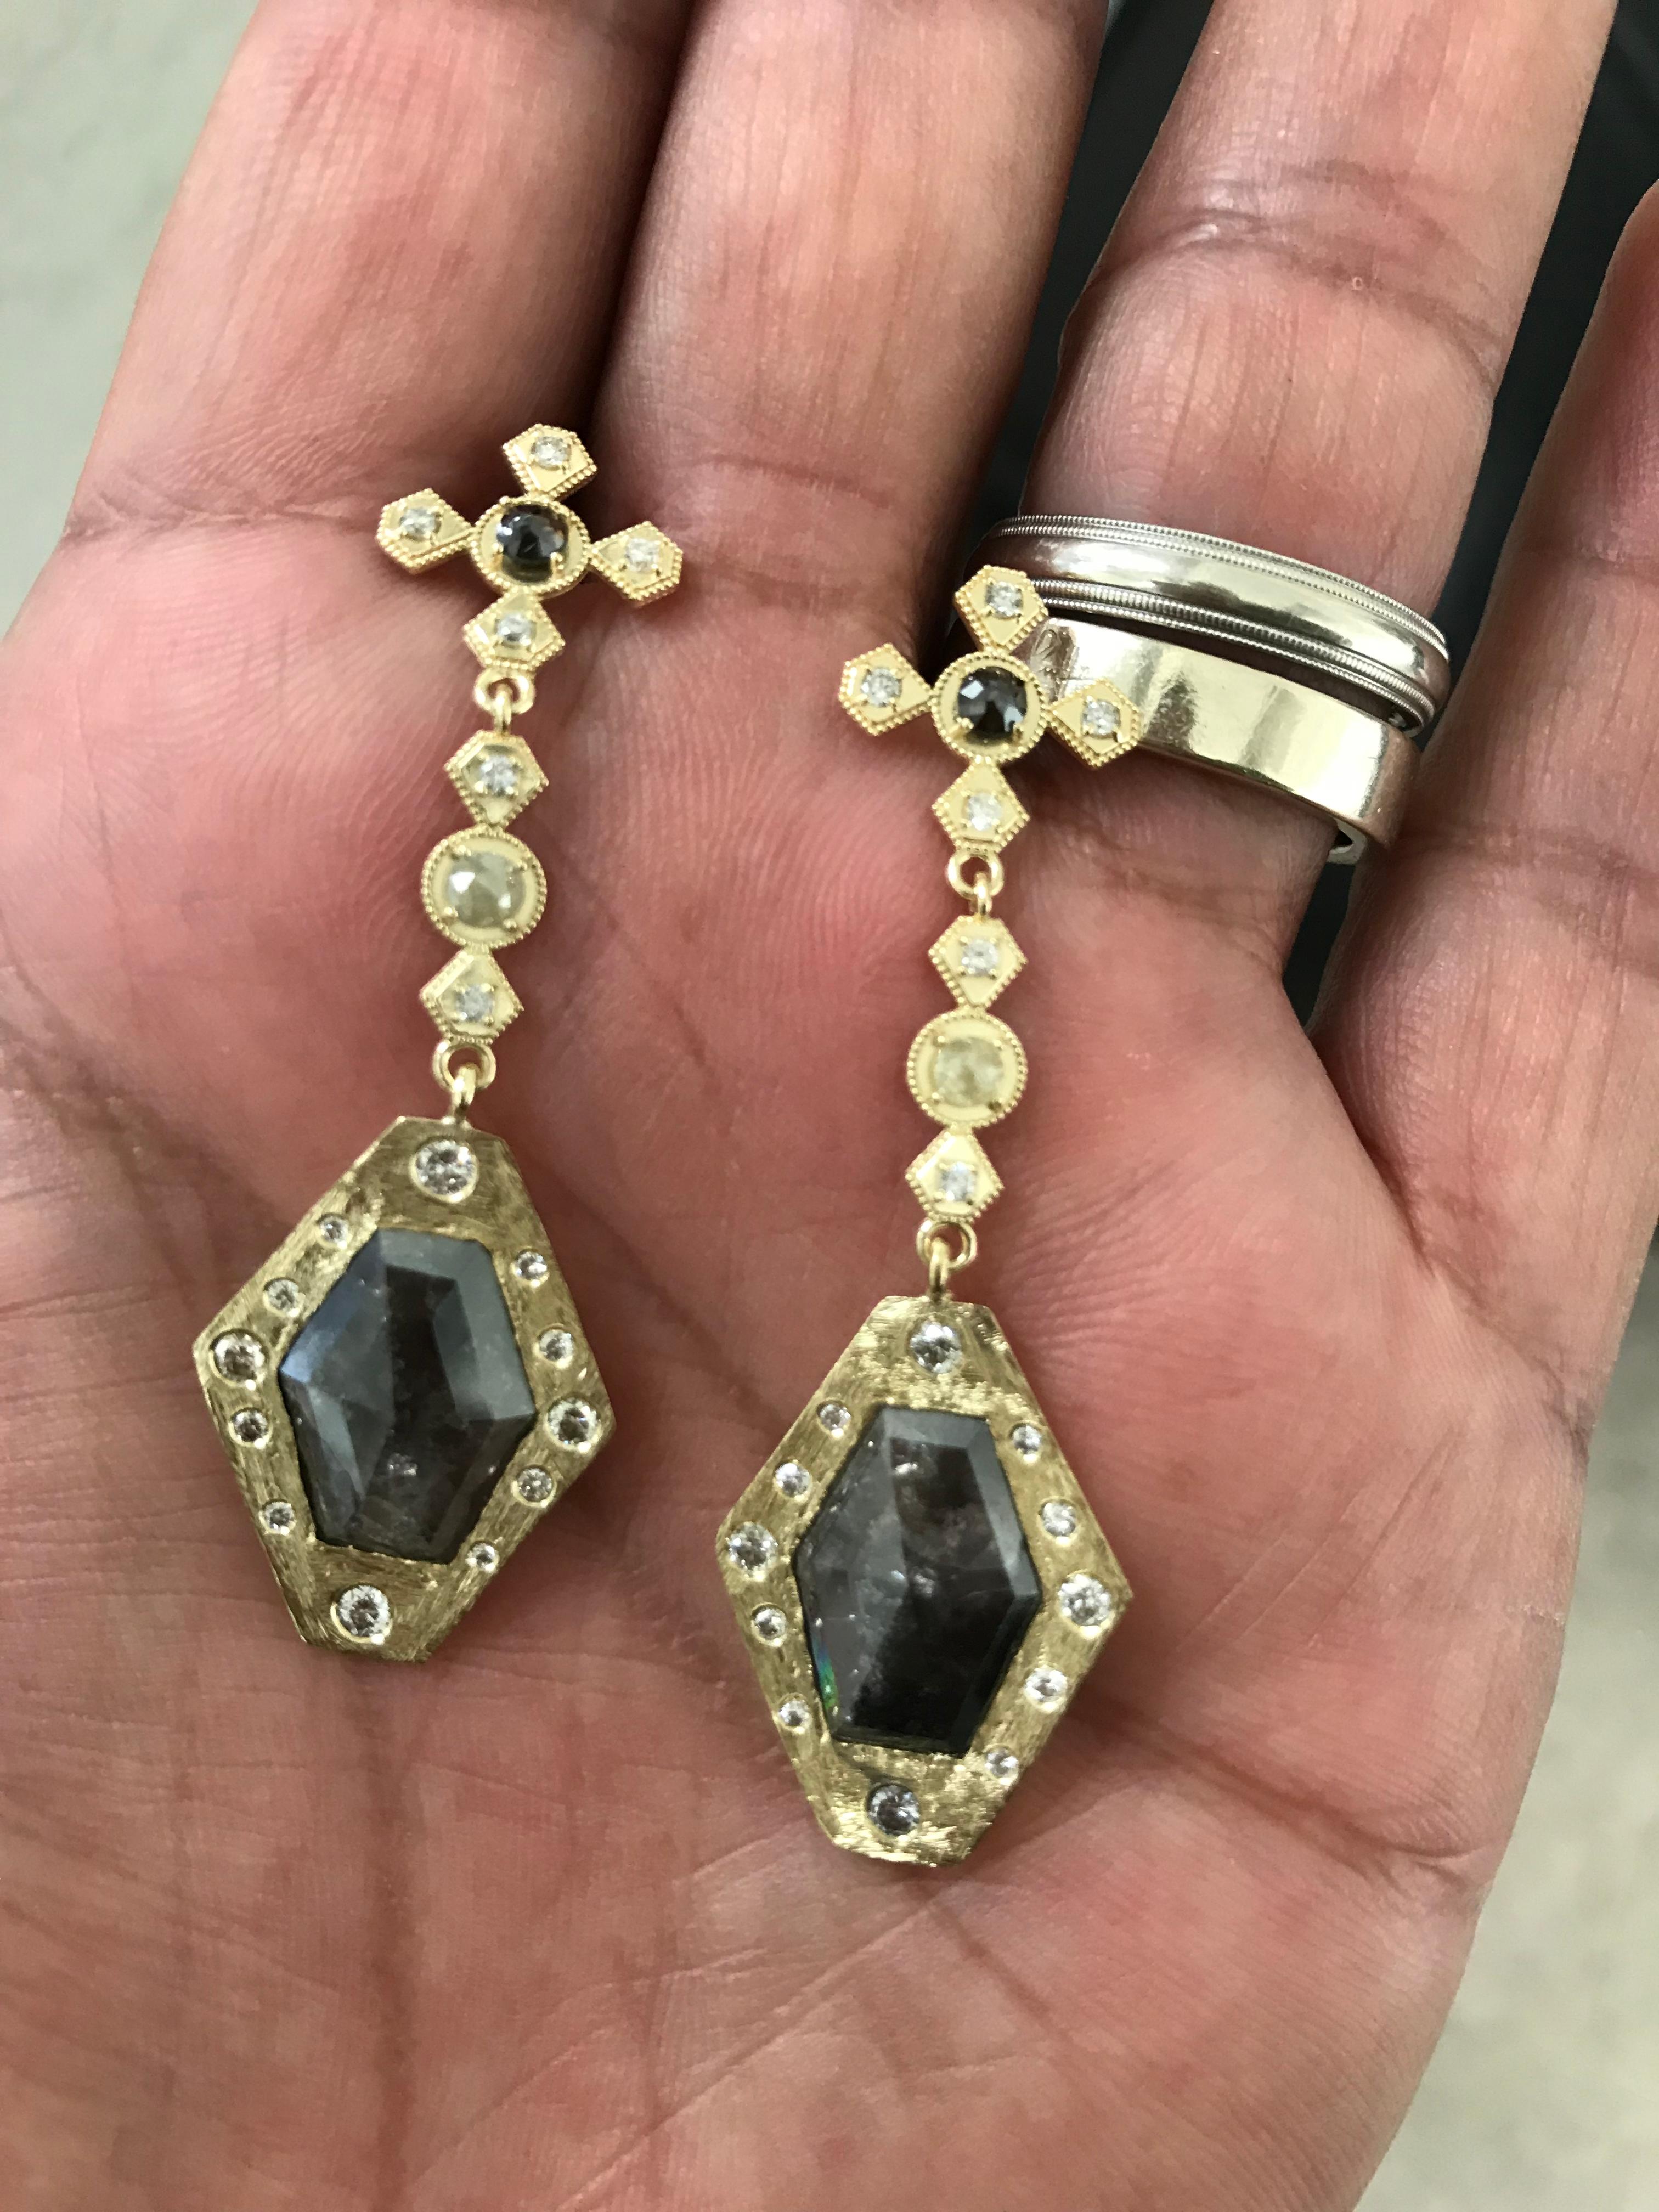 Natural Salt and Pepper Color Trapeze  Rosecut and White Diamond Earrings in 18k Yellow Gold designed by Amyn The Jeweler.

Pair of large Trapeze  diamonds 10.48 cts. 

White full cut diamonds 36 diamonds 0.94 cts. 

4 Rose cut diamonds 0.60cts.